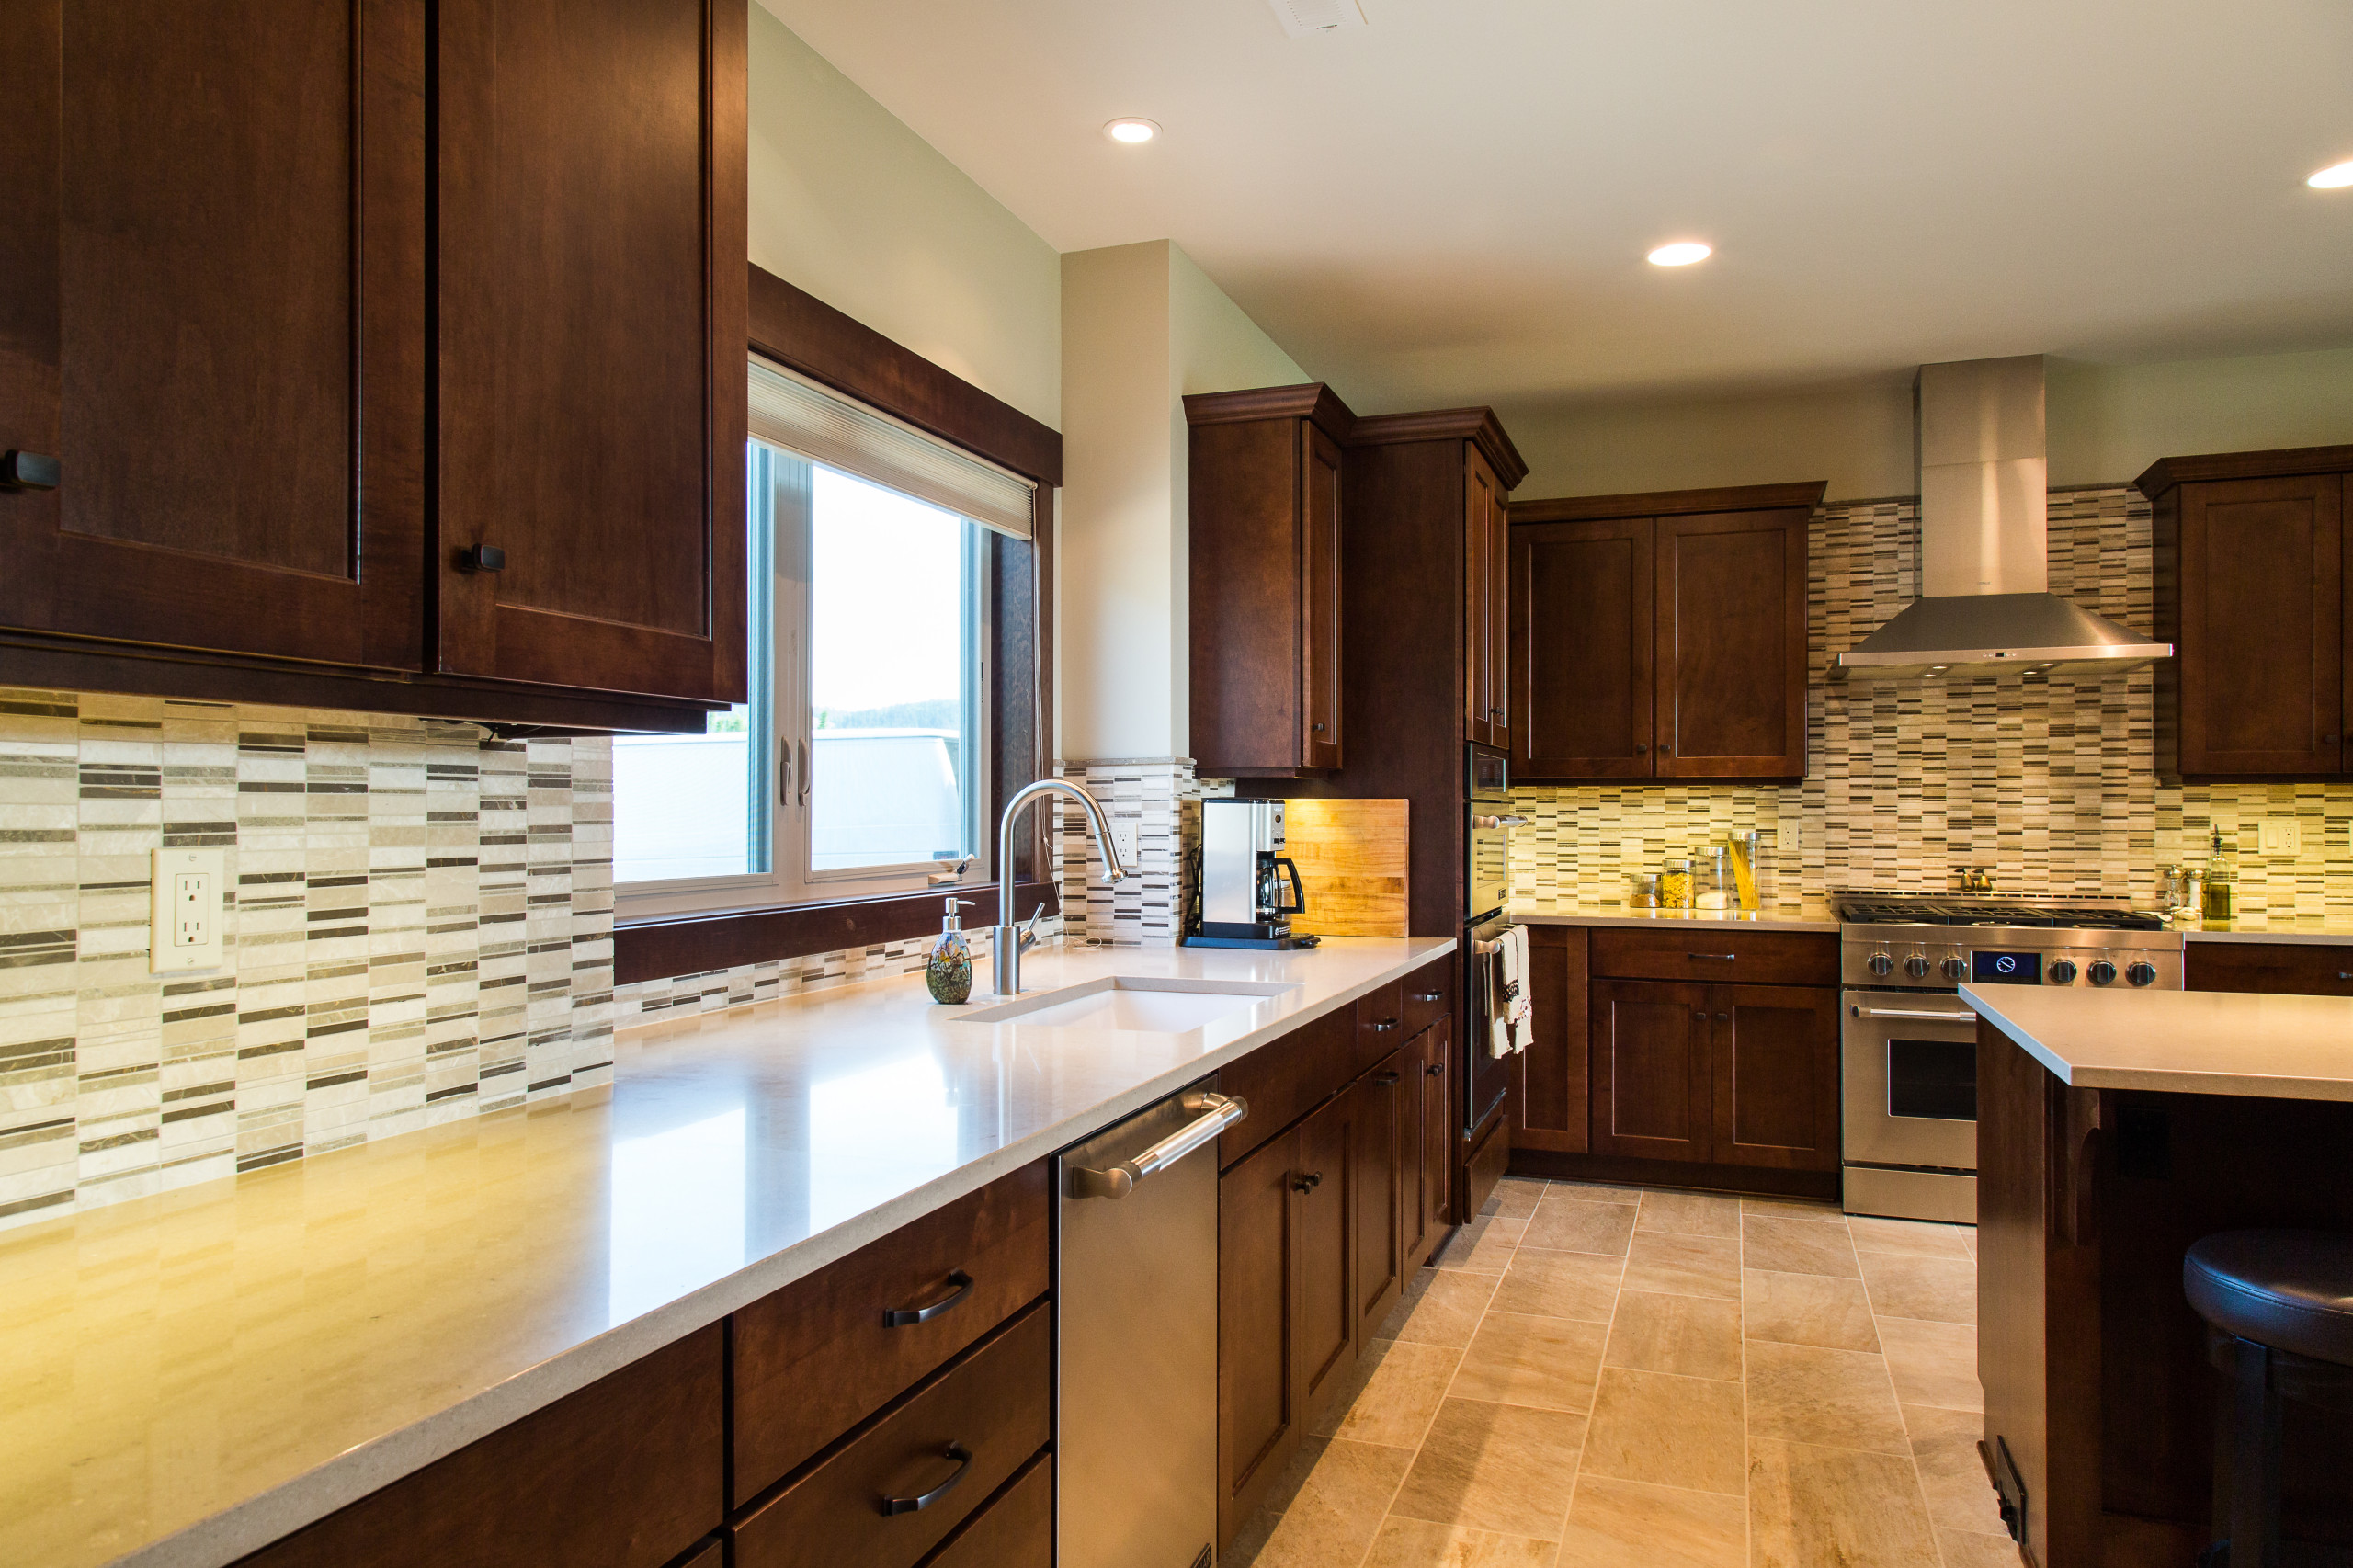 Rich Cabinetry in Northwest Transitional Kitchen